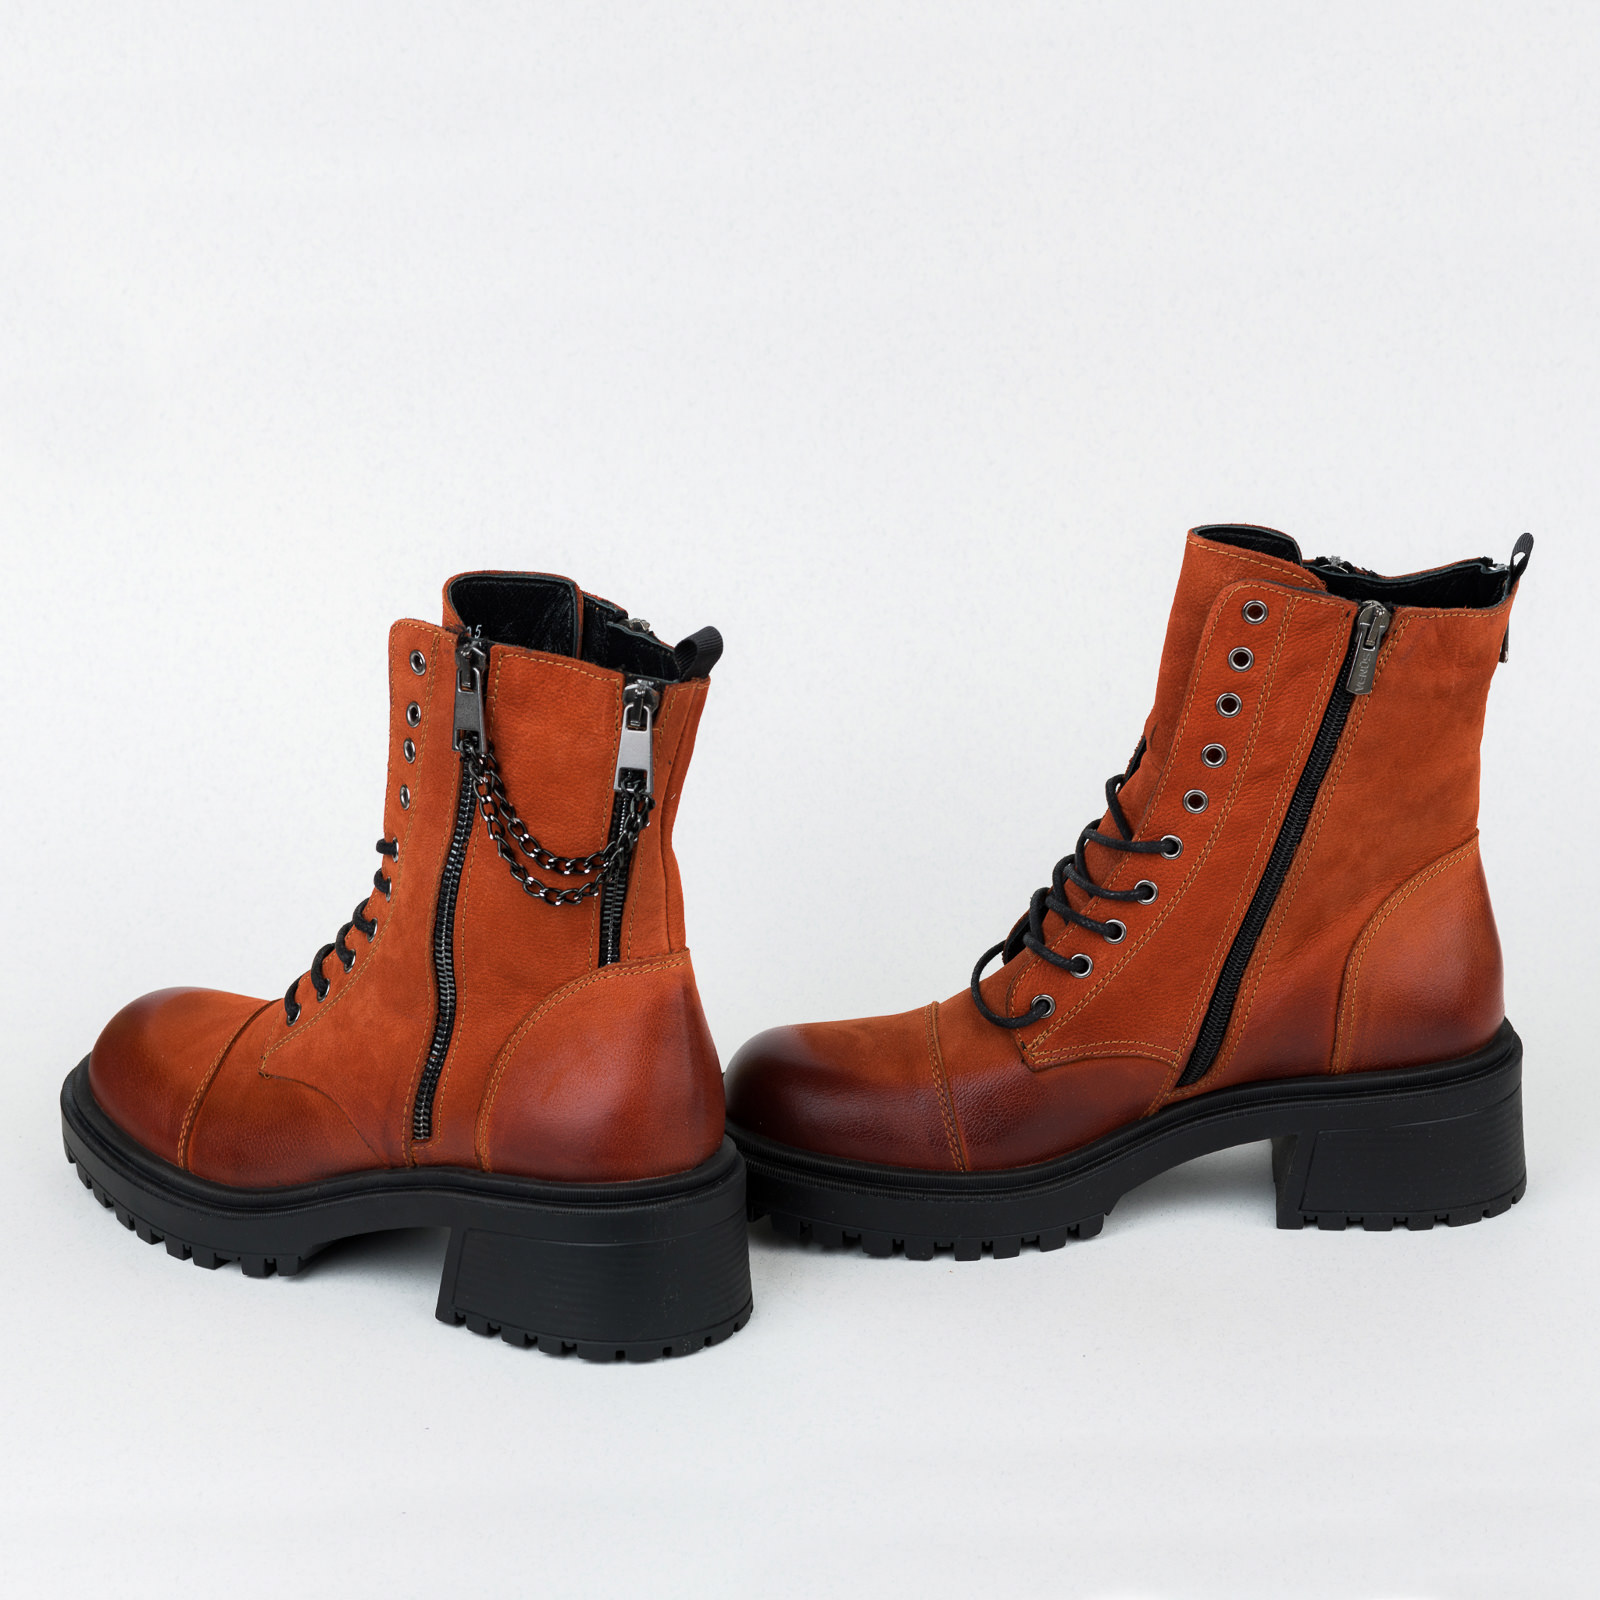 Leather ankle boots B089 - ORANGE